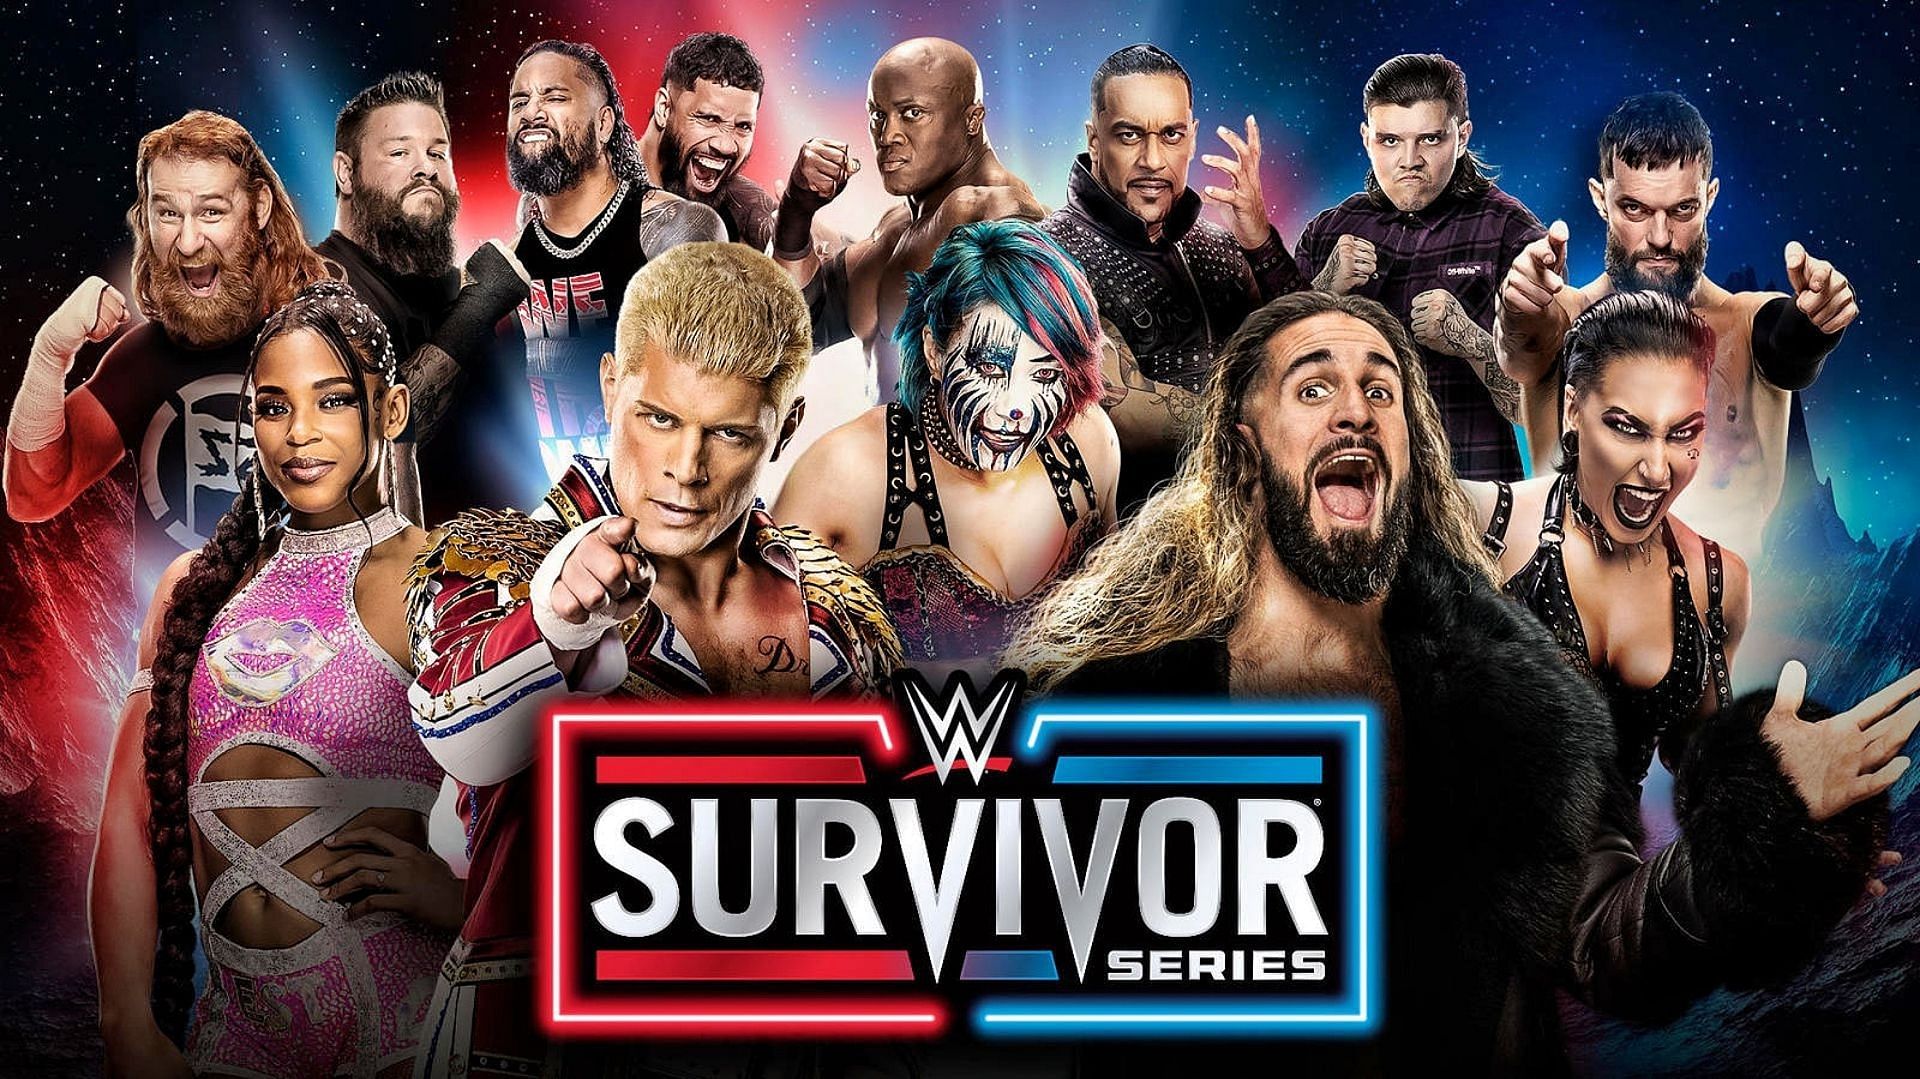 Superstars featured on the poster for Survivor Series